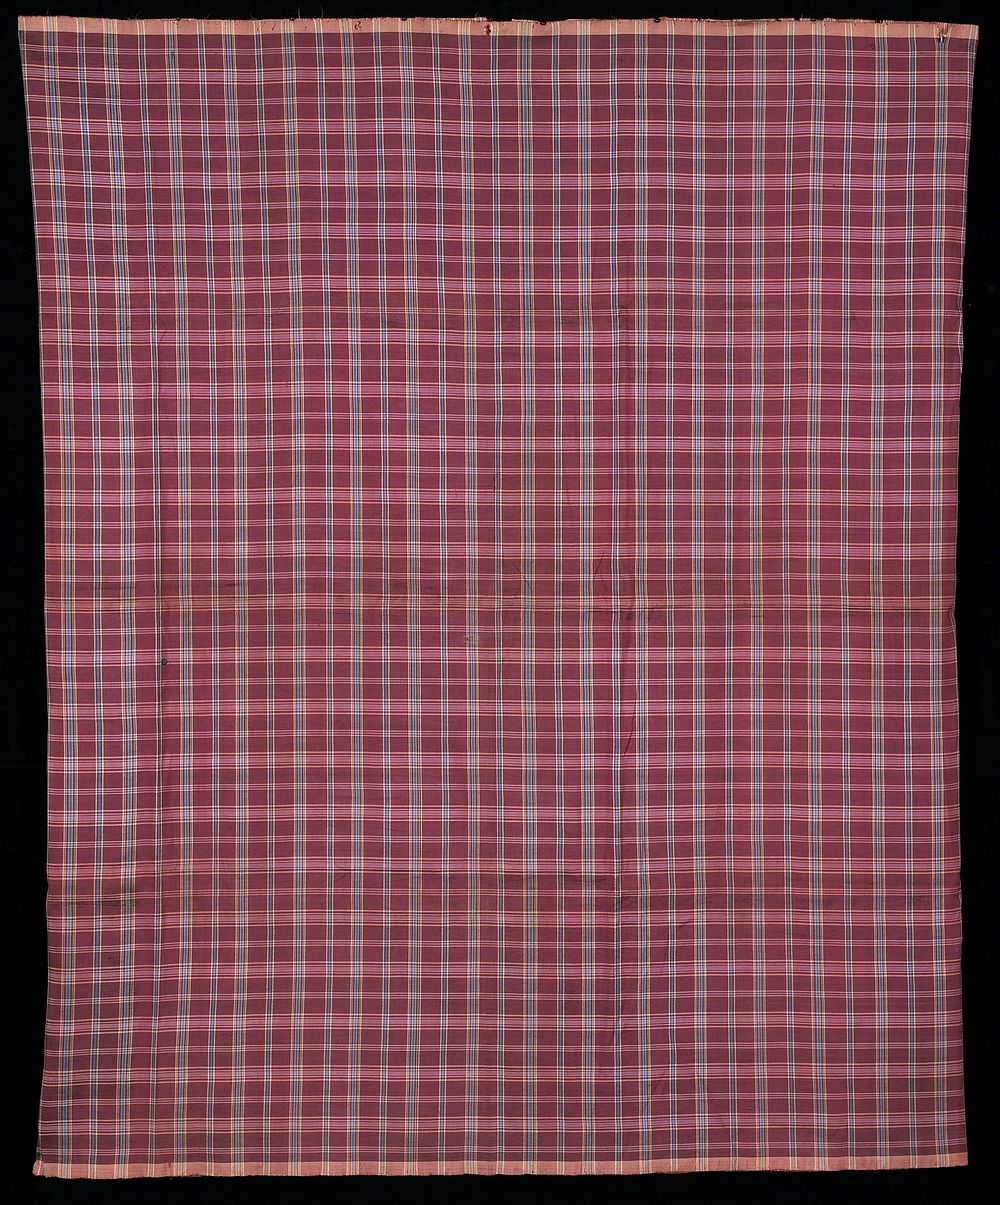 small plaid pattern in burgundy with blue and cream; selvedges top and bottom. Original from the Minneapolis Institute of…